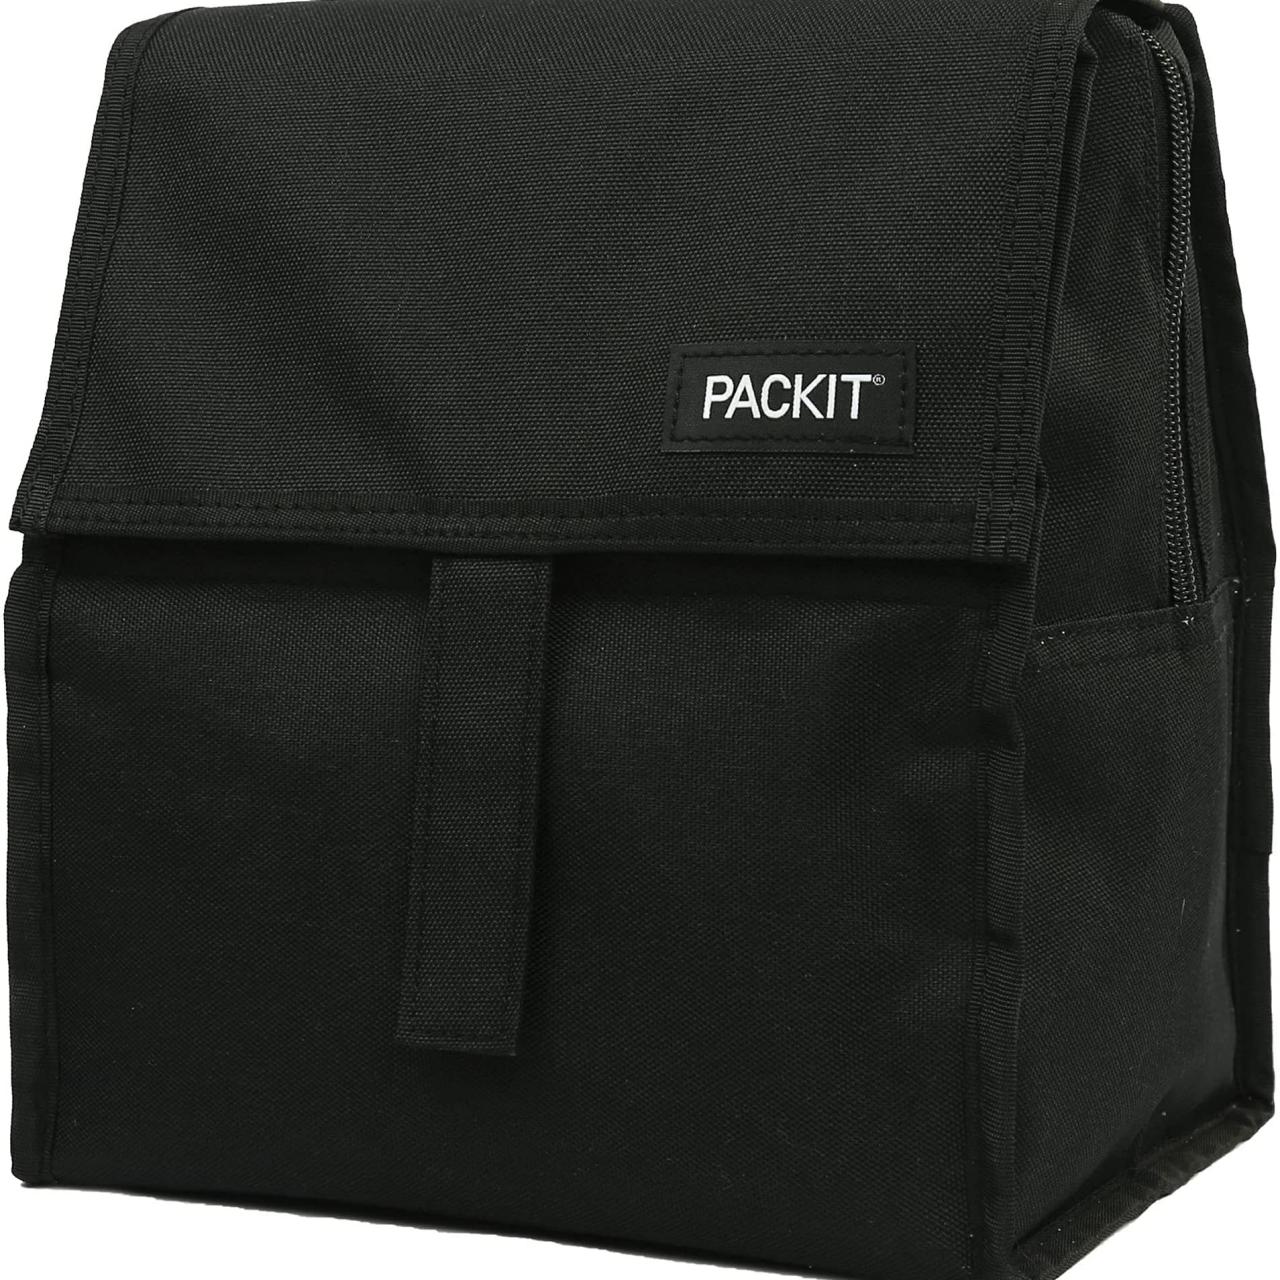 https://food.fnr.sndimg.com/content/dam/images/food/products/2021/7/23/rx_packit-freezable-lunch-bag.jpeg.rend.hgtvcom.1280.1280.suffix/1627069921239.jpeg